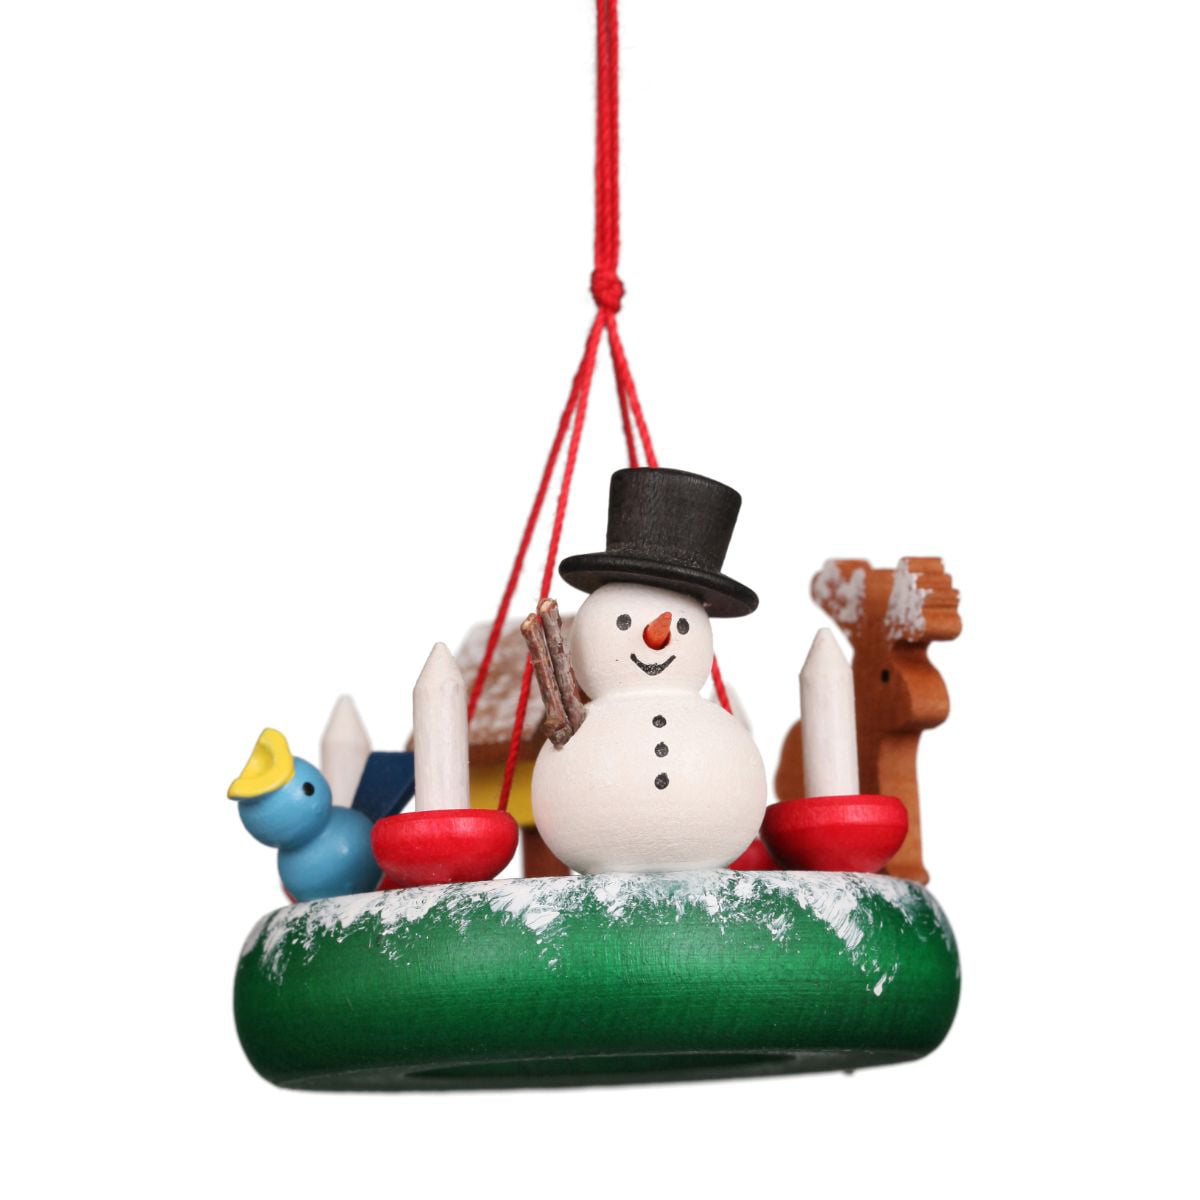 Picture of Alexander Taron 10-0659 Christian Ulbricht Ornament - Wreath with Snowman - 2 x 2.25 x 2.25 in.